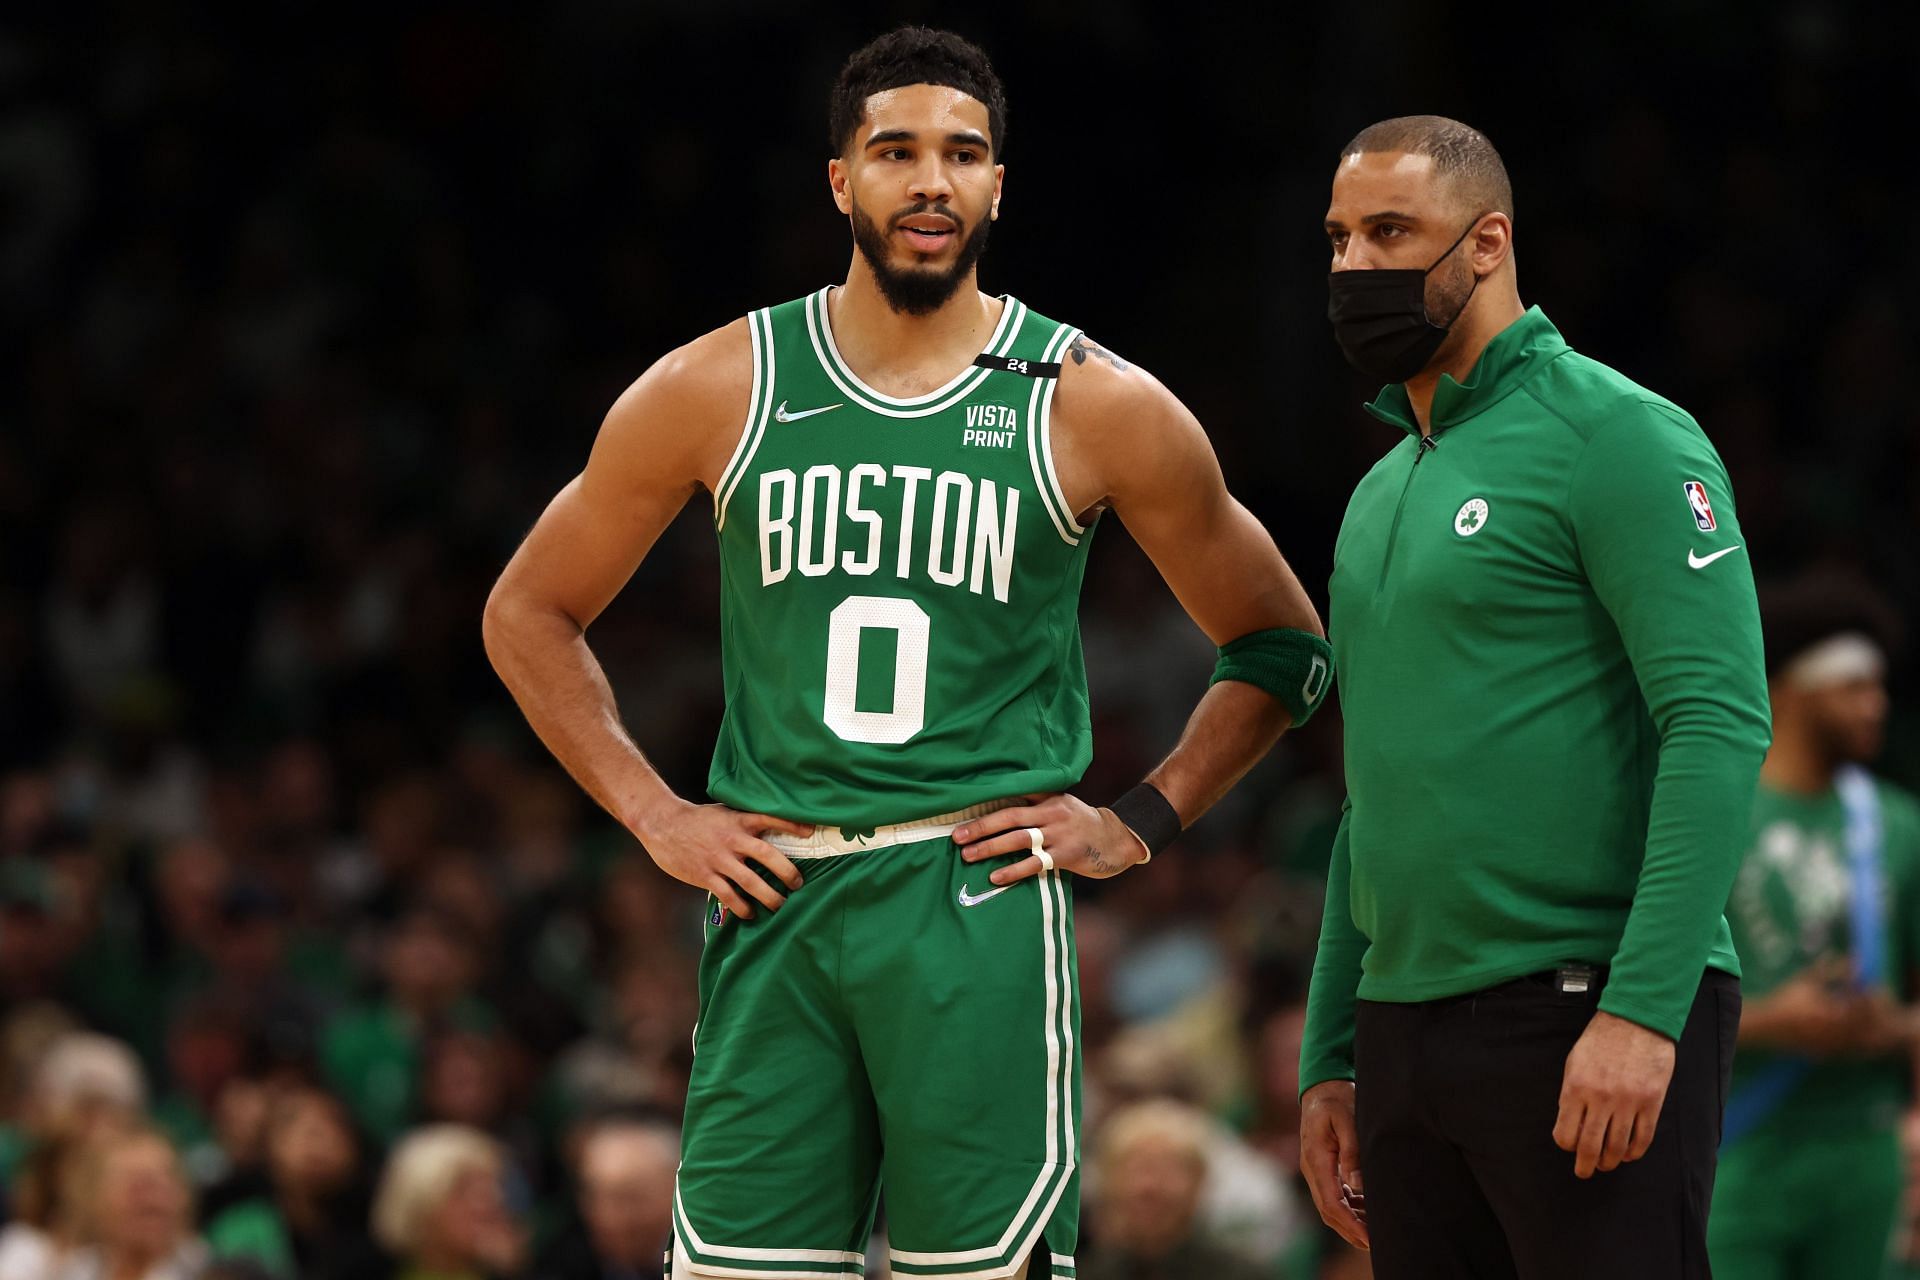 Jayson Tatum is required to contribute on both ends for the team&#039;s success.